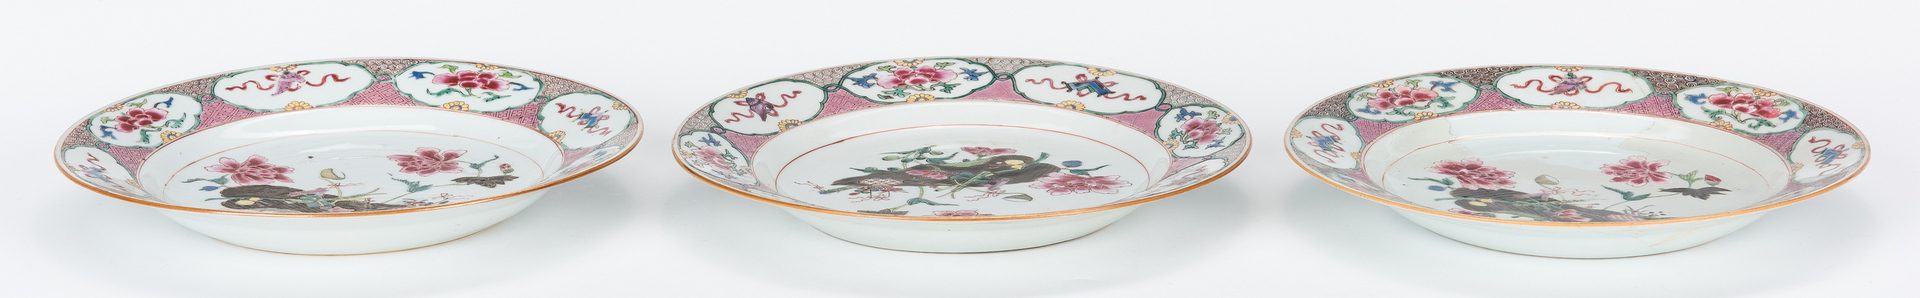 Lot 23: 5 Chinese Export Famille Rose Porcelain Pieces